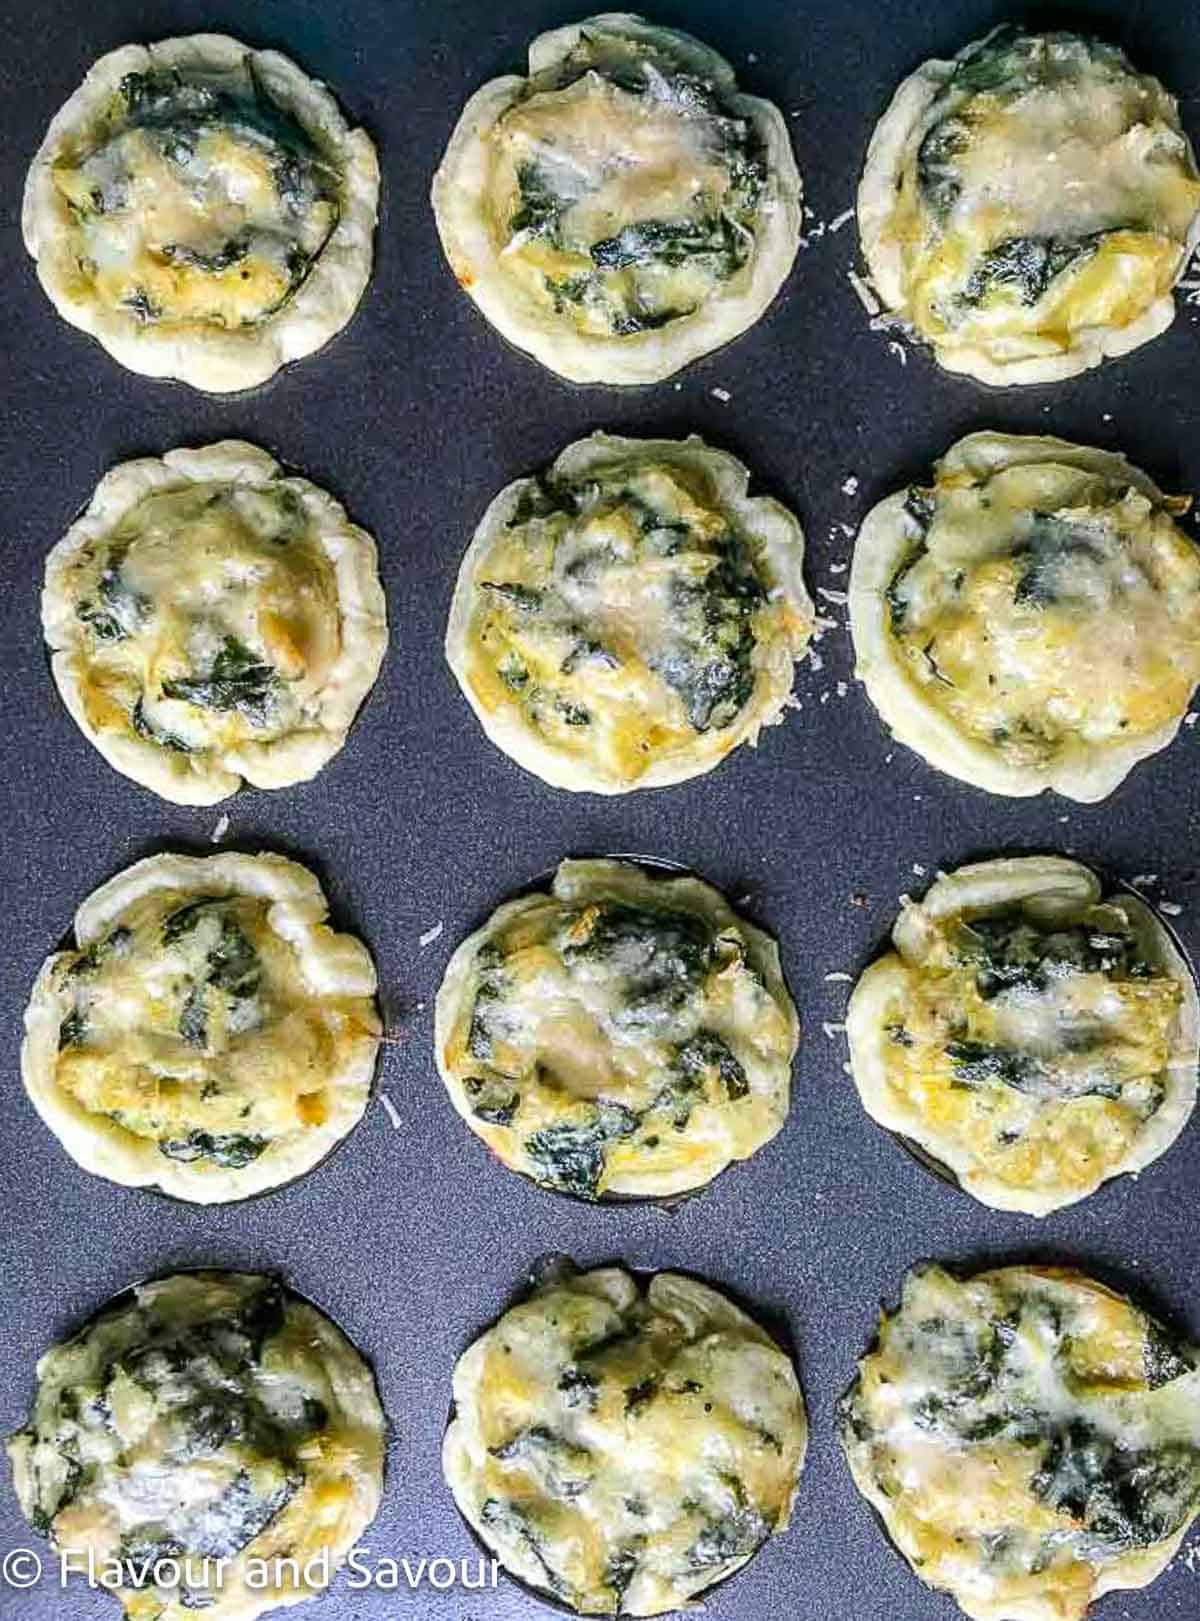 Tart shells filled with spinach artichoke filling.